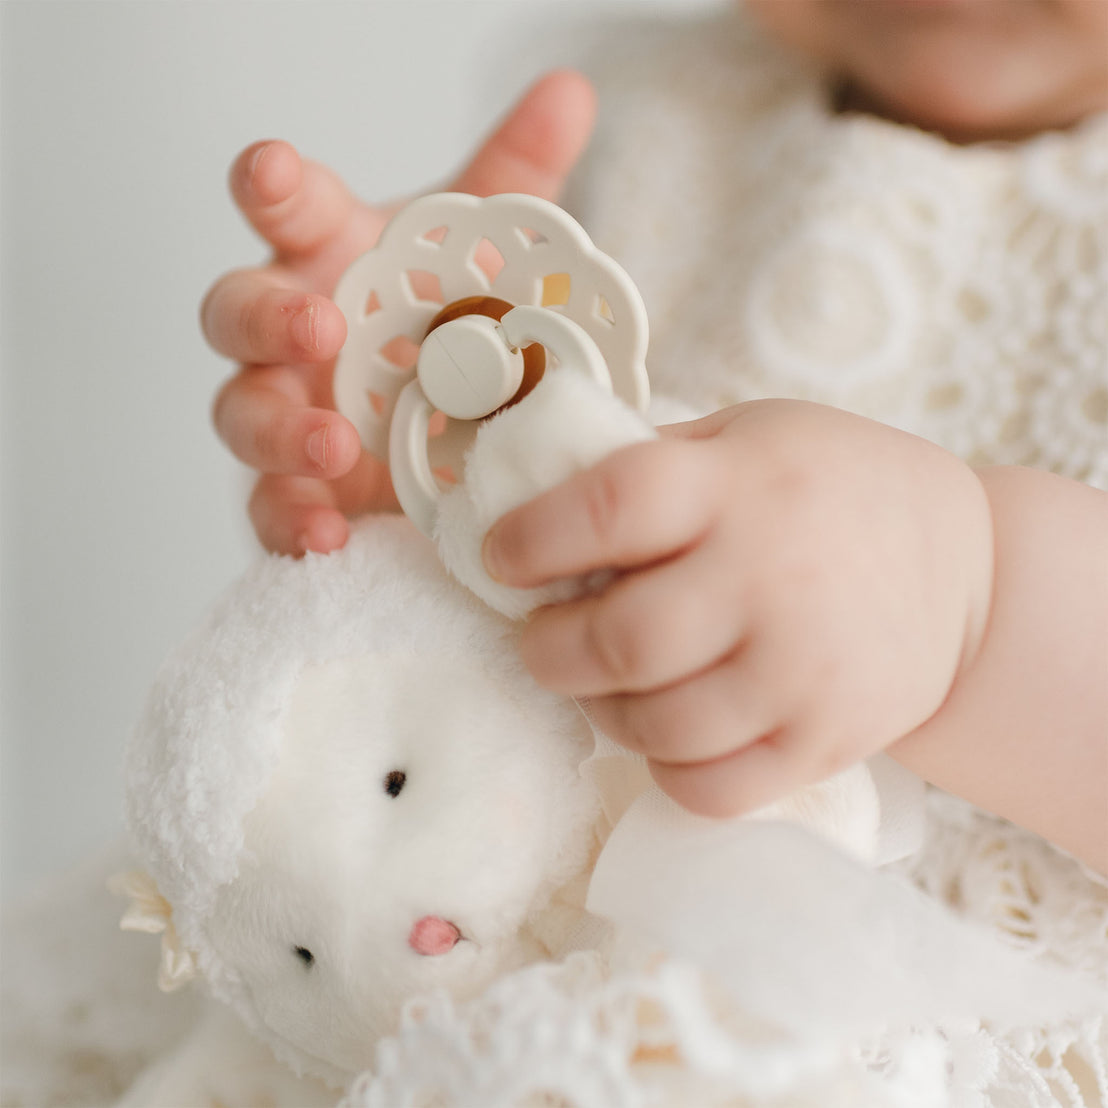 A baby dressed in white holds a Poppy Silly Lamb Buddy | Pacifier Holder while fiddling with a pacifier clip. The soft velour toy, also white, has a gentle face and a woolly texture, evoking a lamb or sheep. The baby's small hands are in focus, grasping the toy and pacifier delicately.